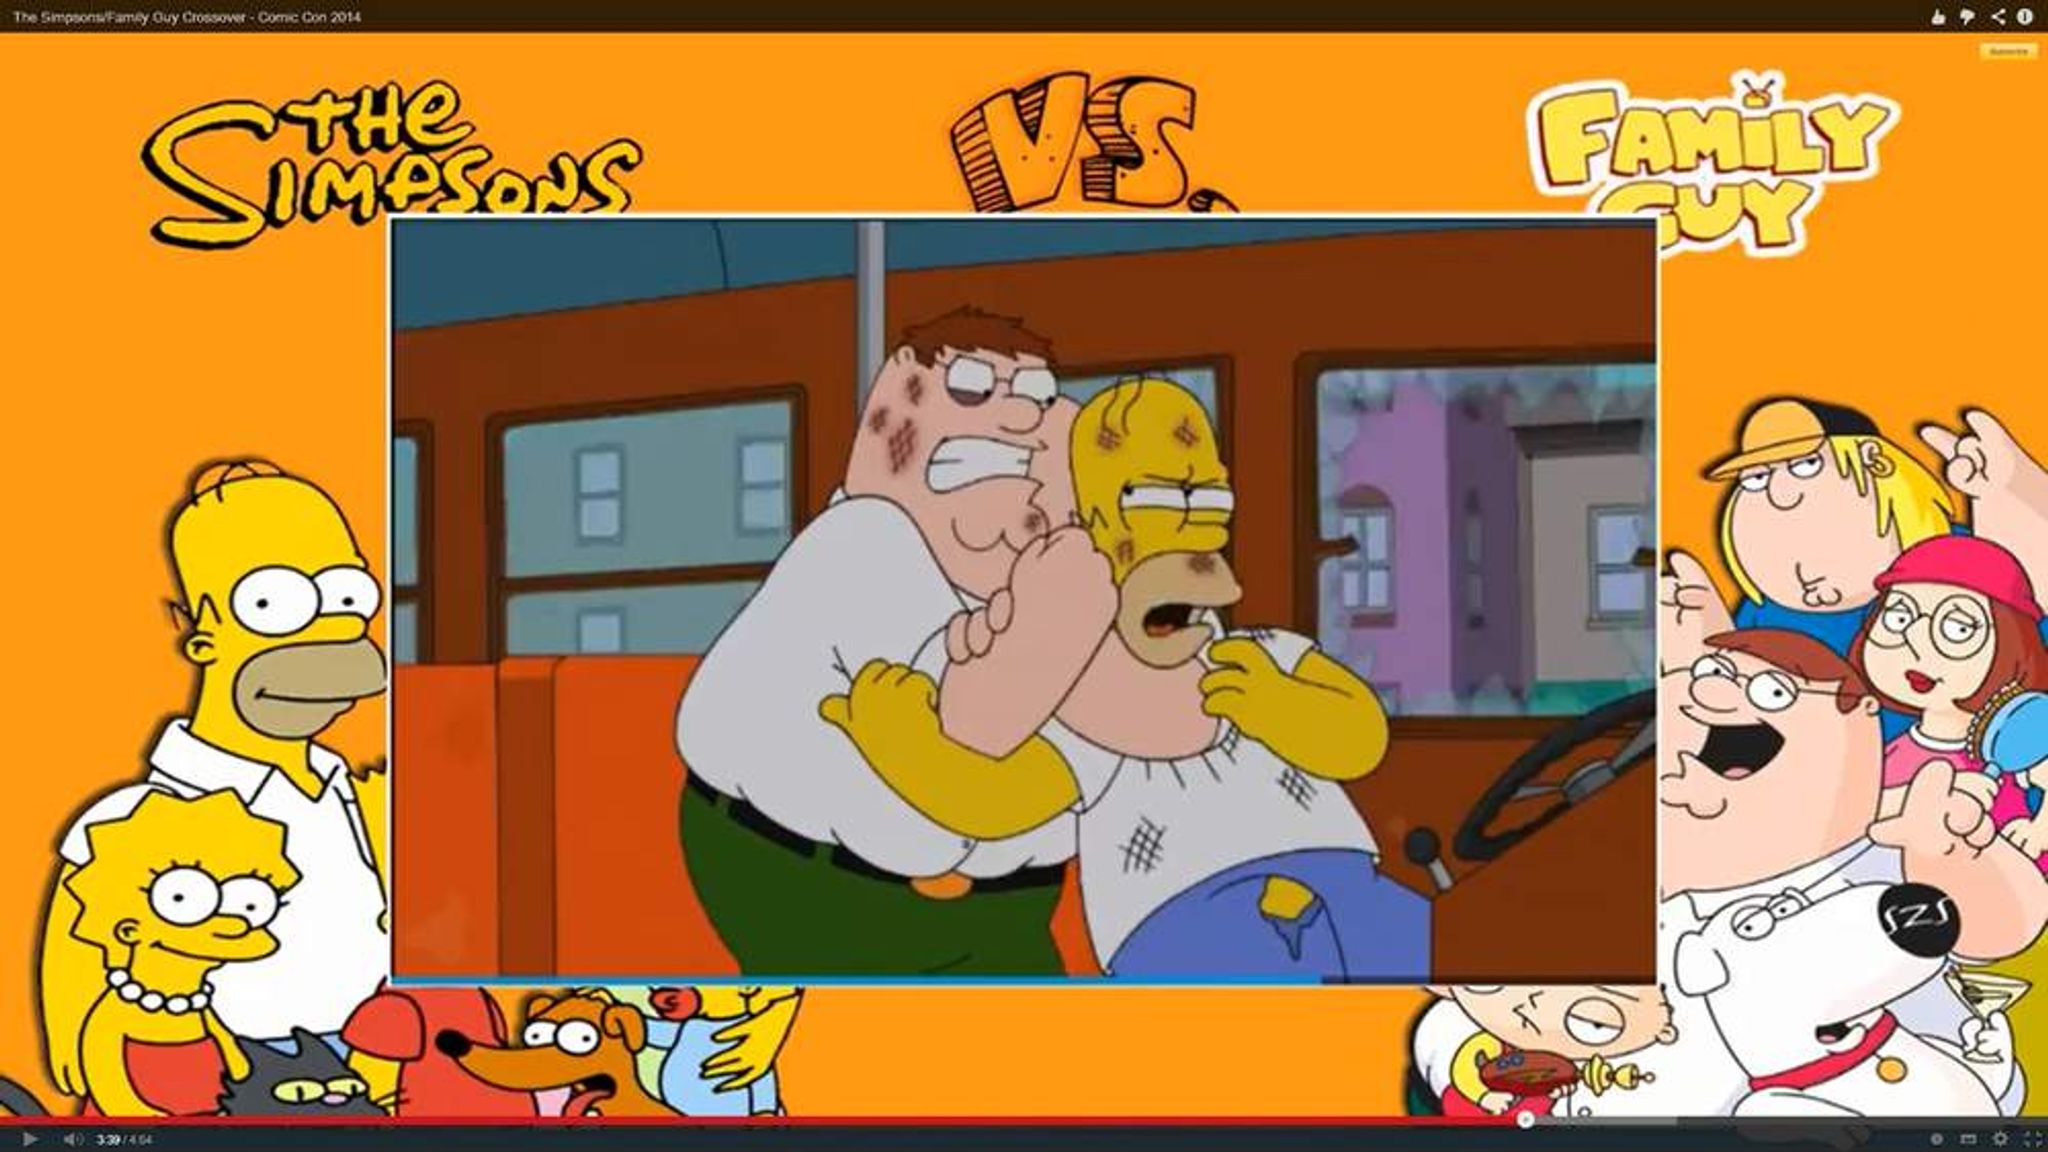 SPOILER ALERT: 'Family Guy' and 'The Simpsons' crossover and a